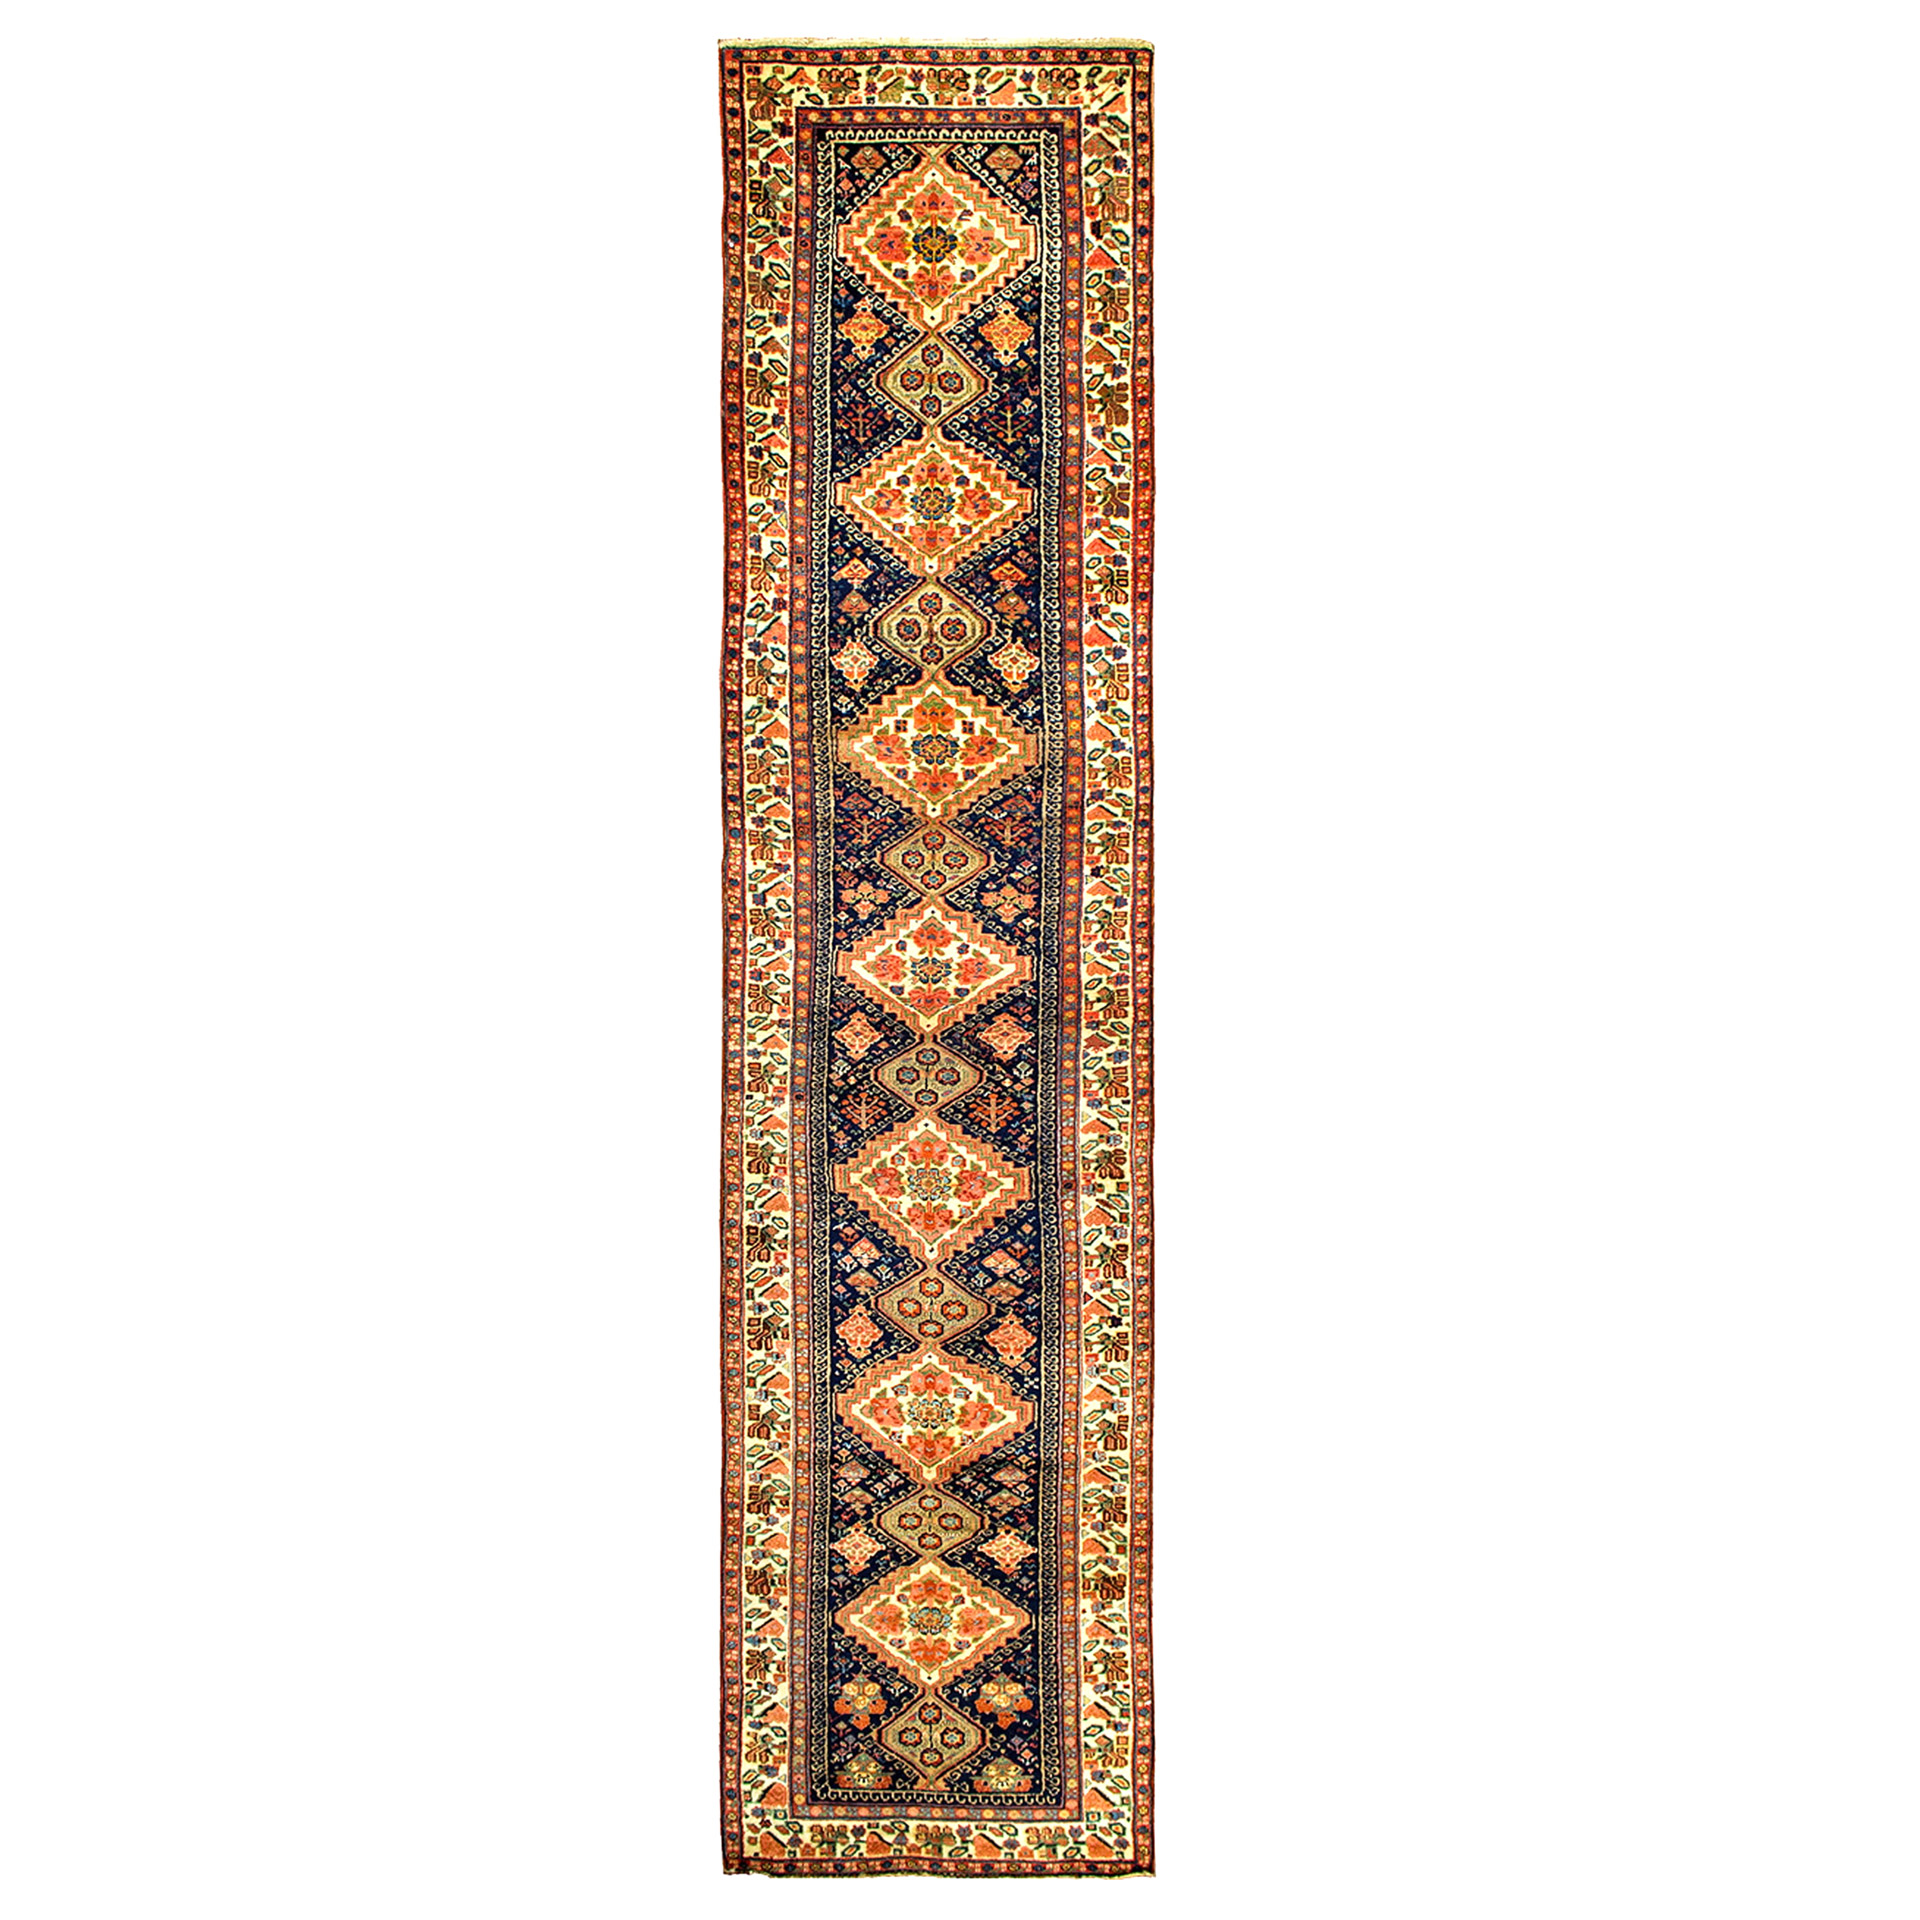 Antique northwest Persian runner rug with ivory medallions on a navy field that is framed by an ivory border, circa 1900 - Douglas Stock Gallery, antique Oriental rugs, room size antique carpets, antique runner rugs, Boston,MA area, South Natick, New England